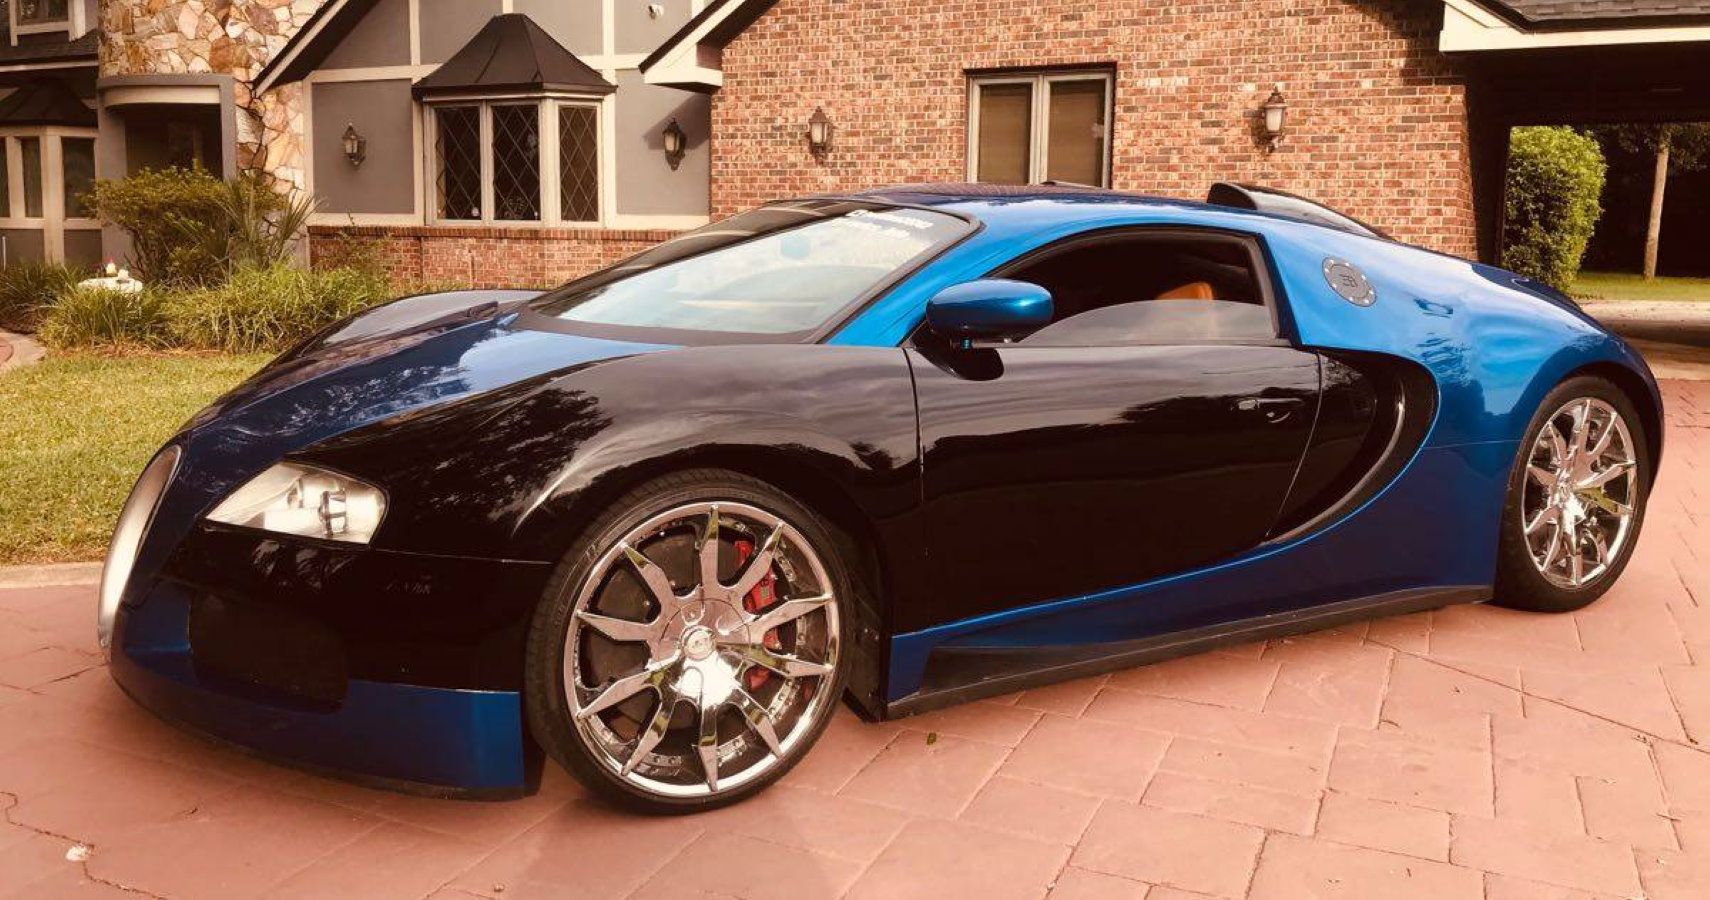 Bugatti Veyron Is Actually A 2002 Mercury Cougar, Owner Asking For 6 Figures